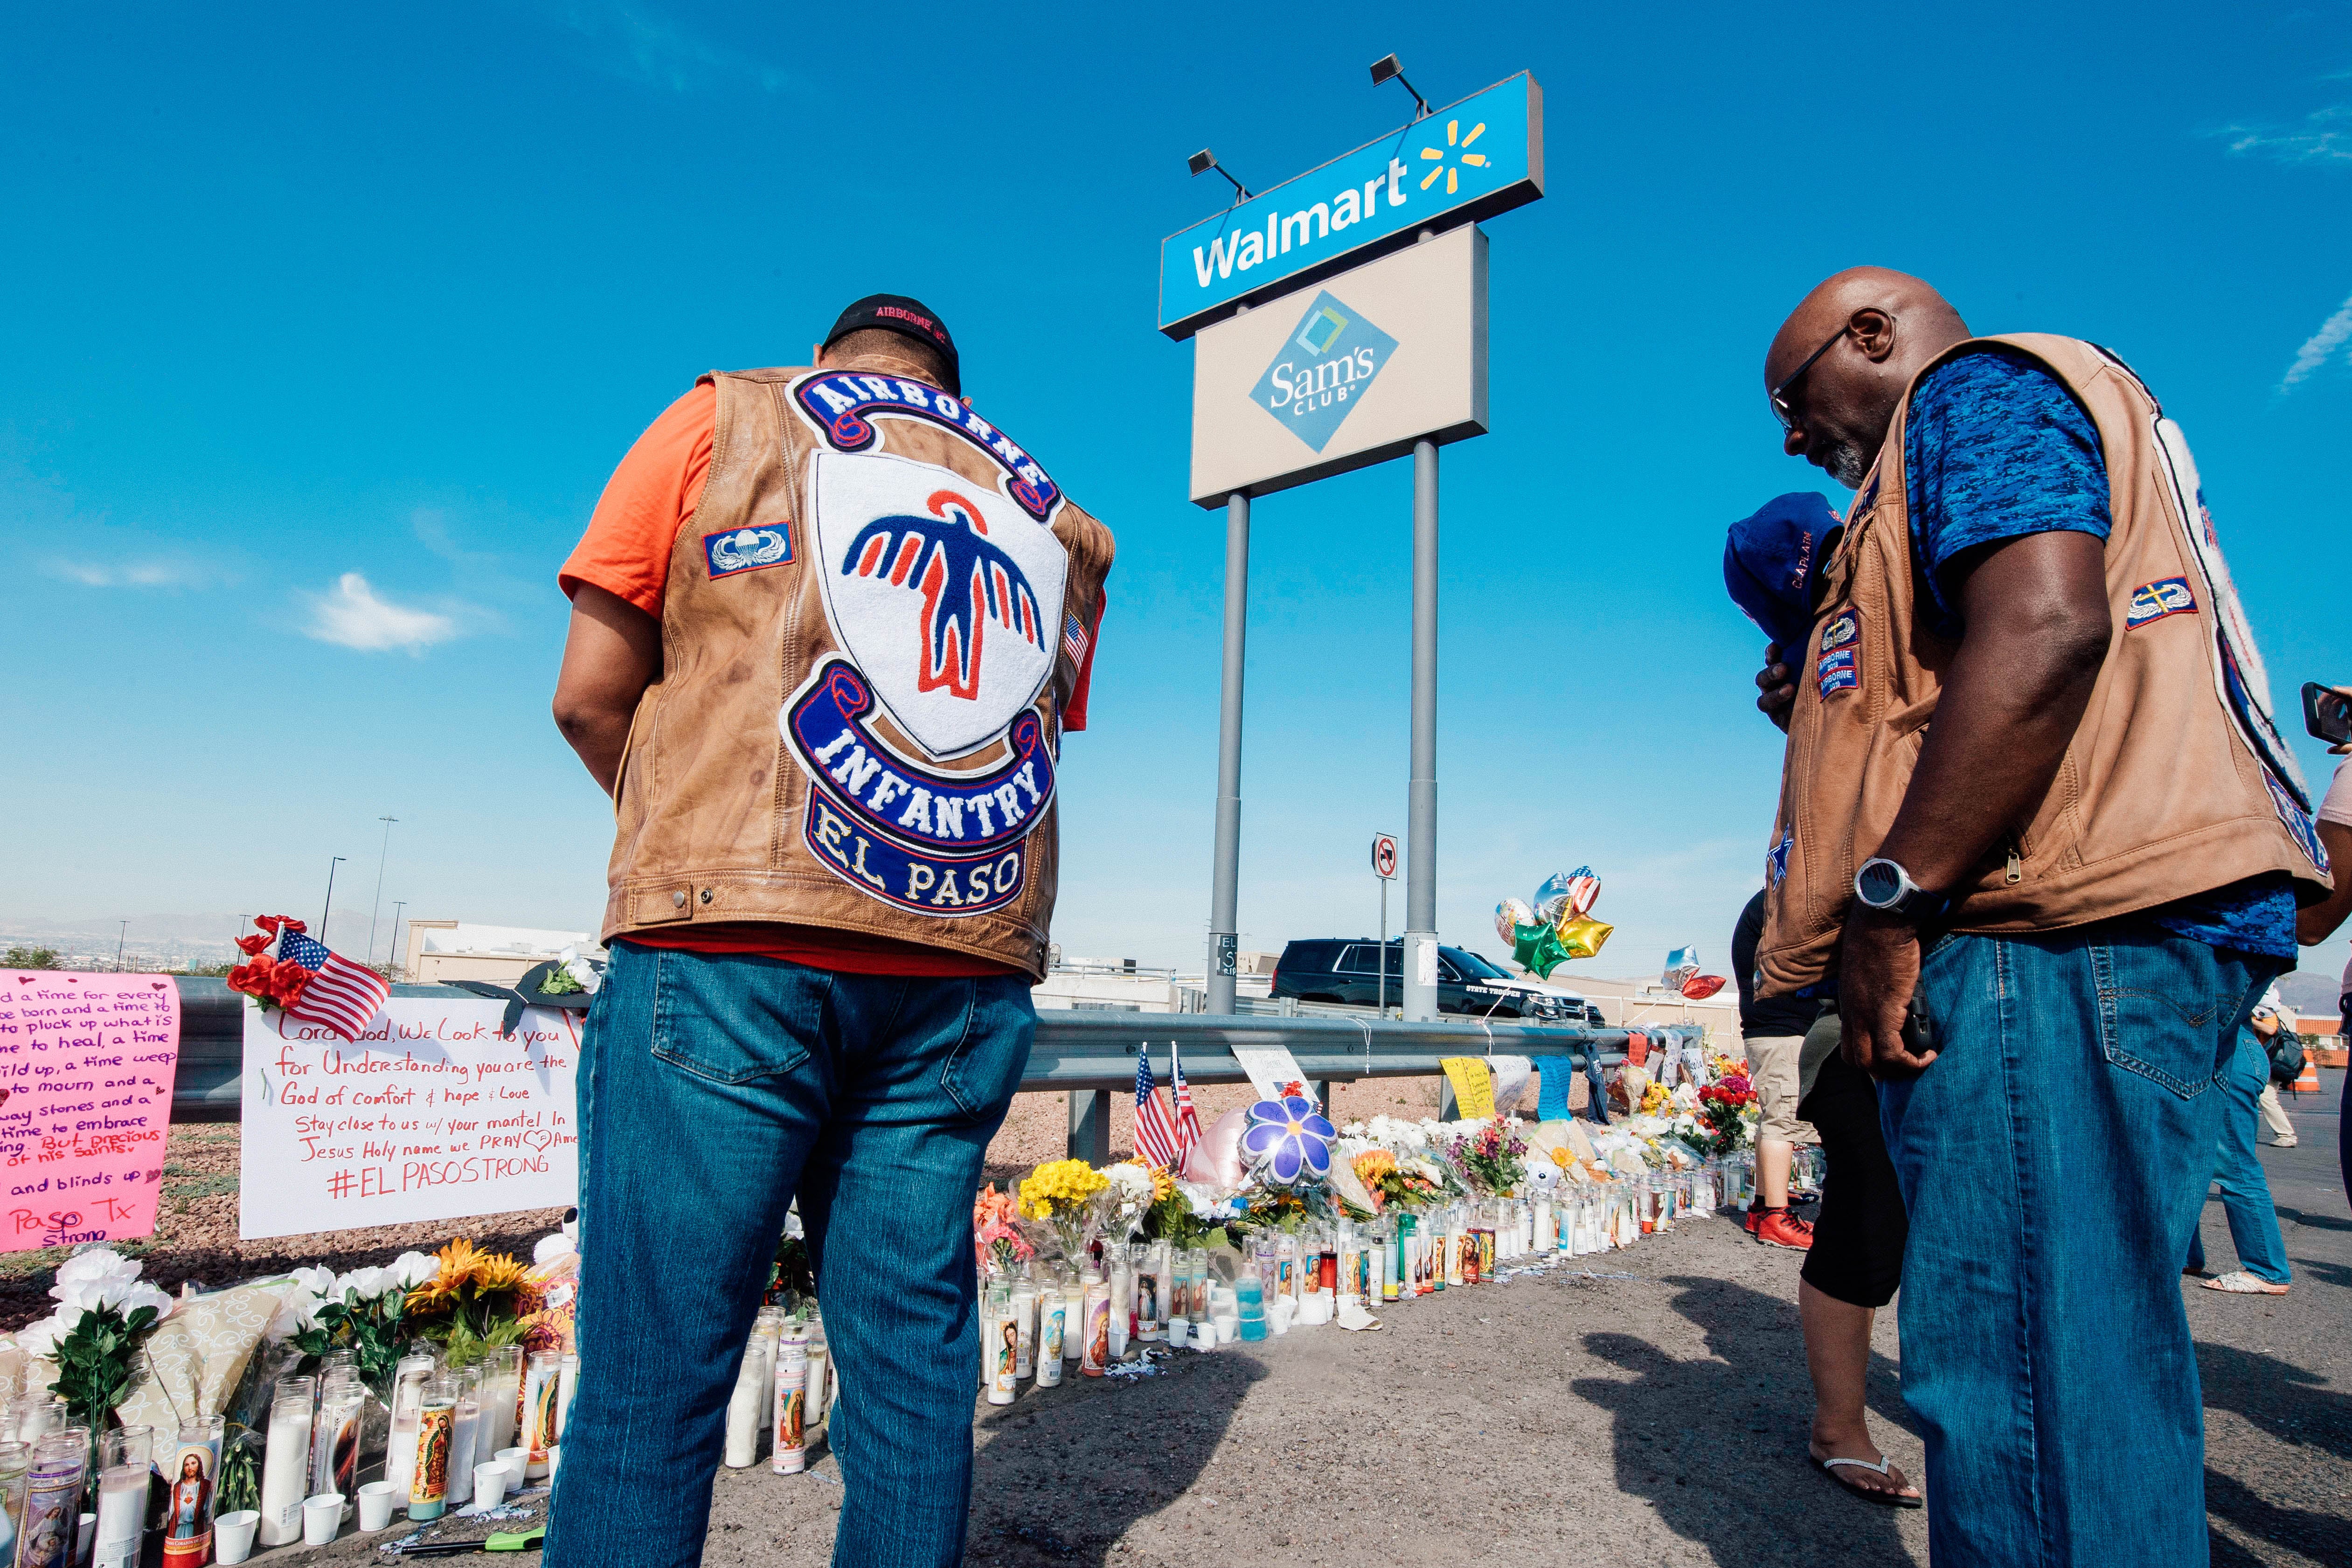 People in motorcycle gear bow their heads in prayer before a memorial of flowers and signs of support for the shooting victims.